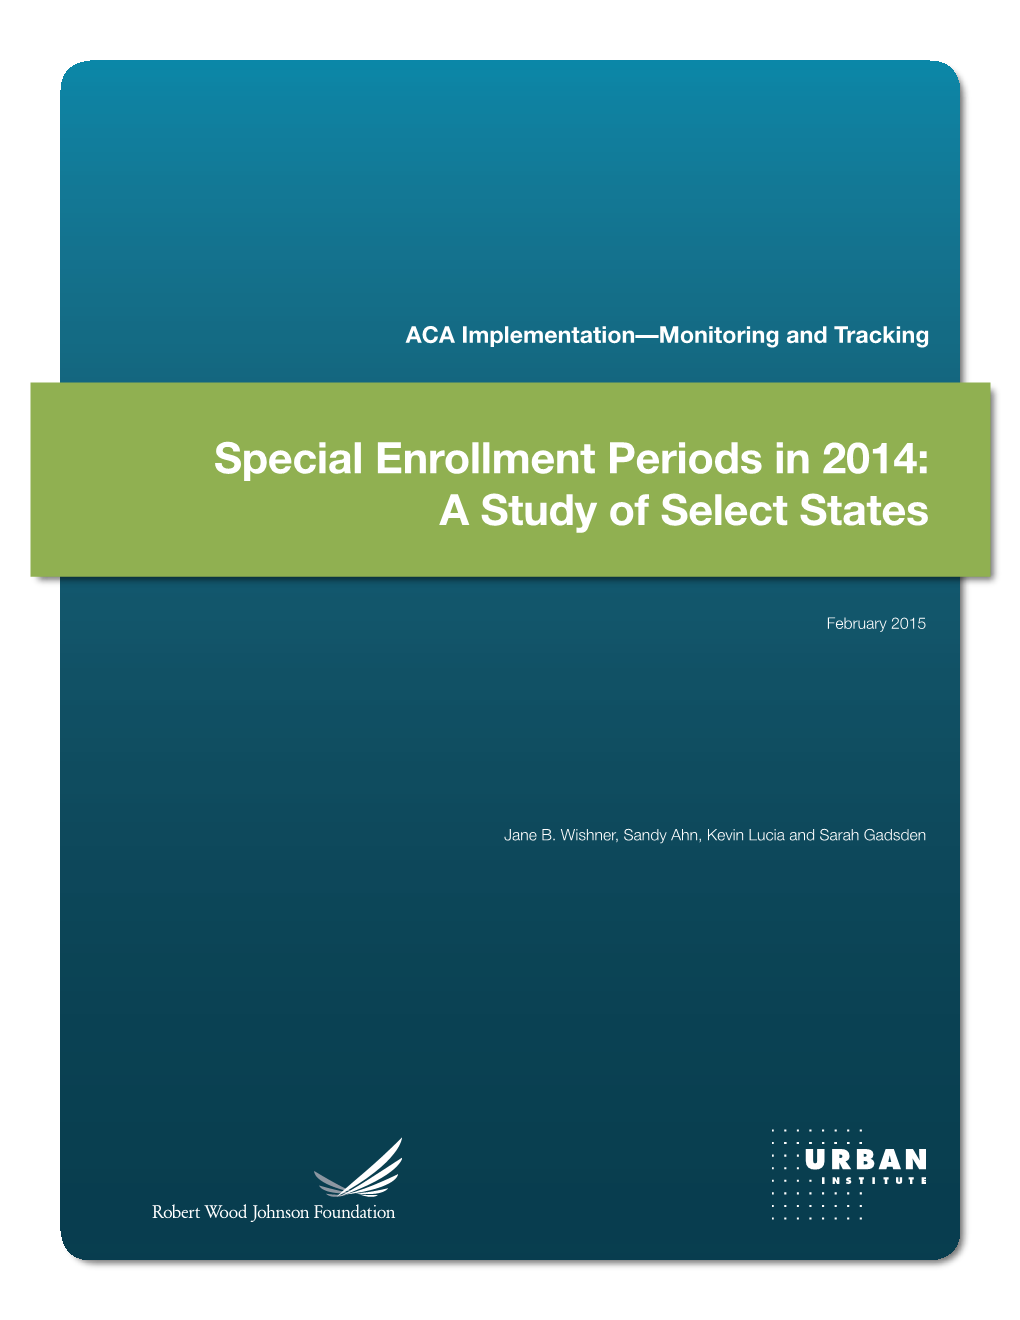 Special Enrollment Periods in 2014: a Study of Select States